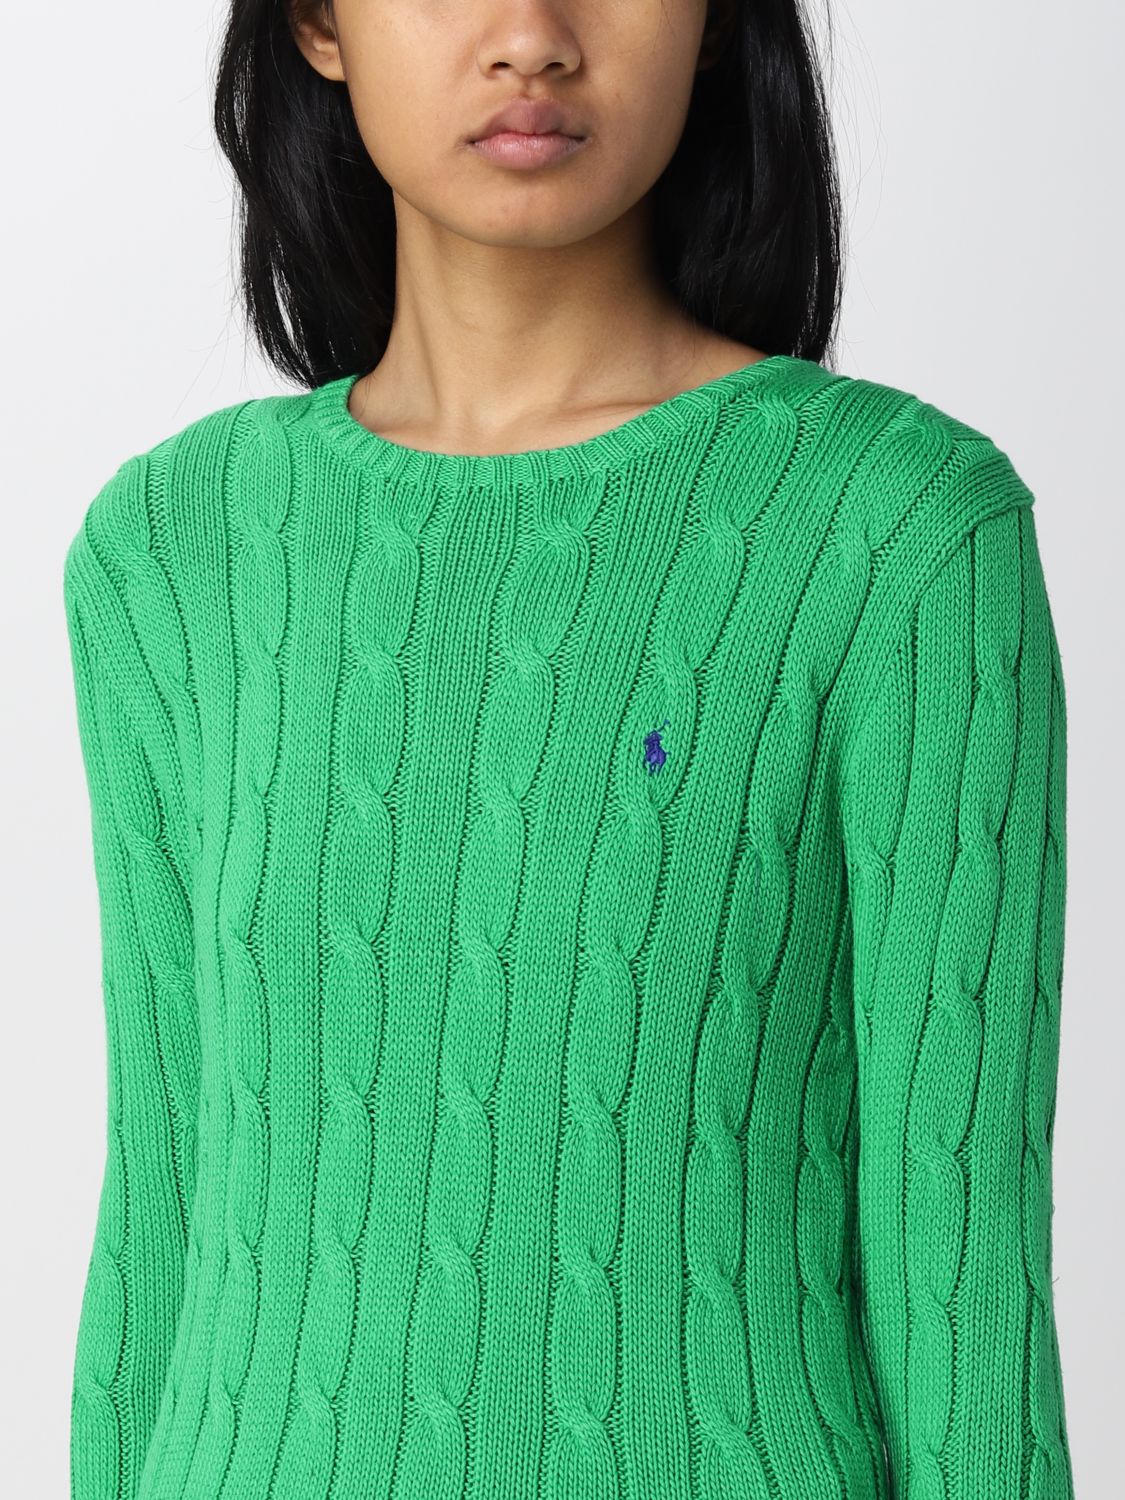 POLO RALPH LAUREN: sweater for woman - Green | Polo Ralph Lauren sweater  211891640 online on 